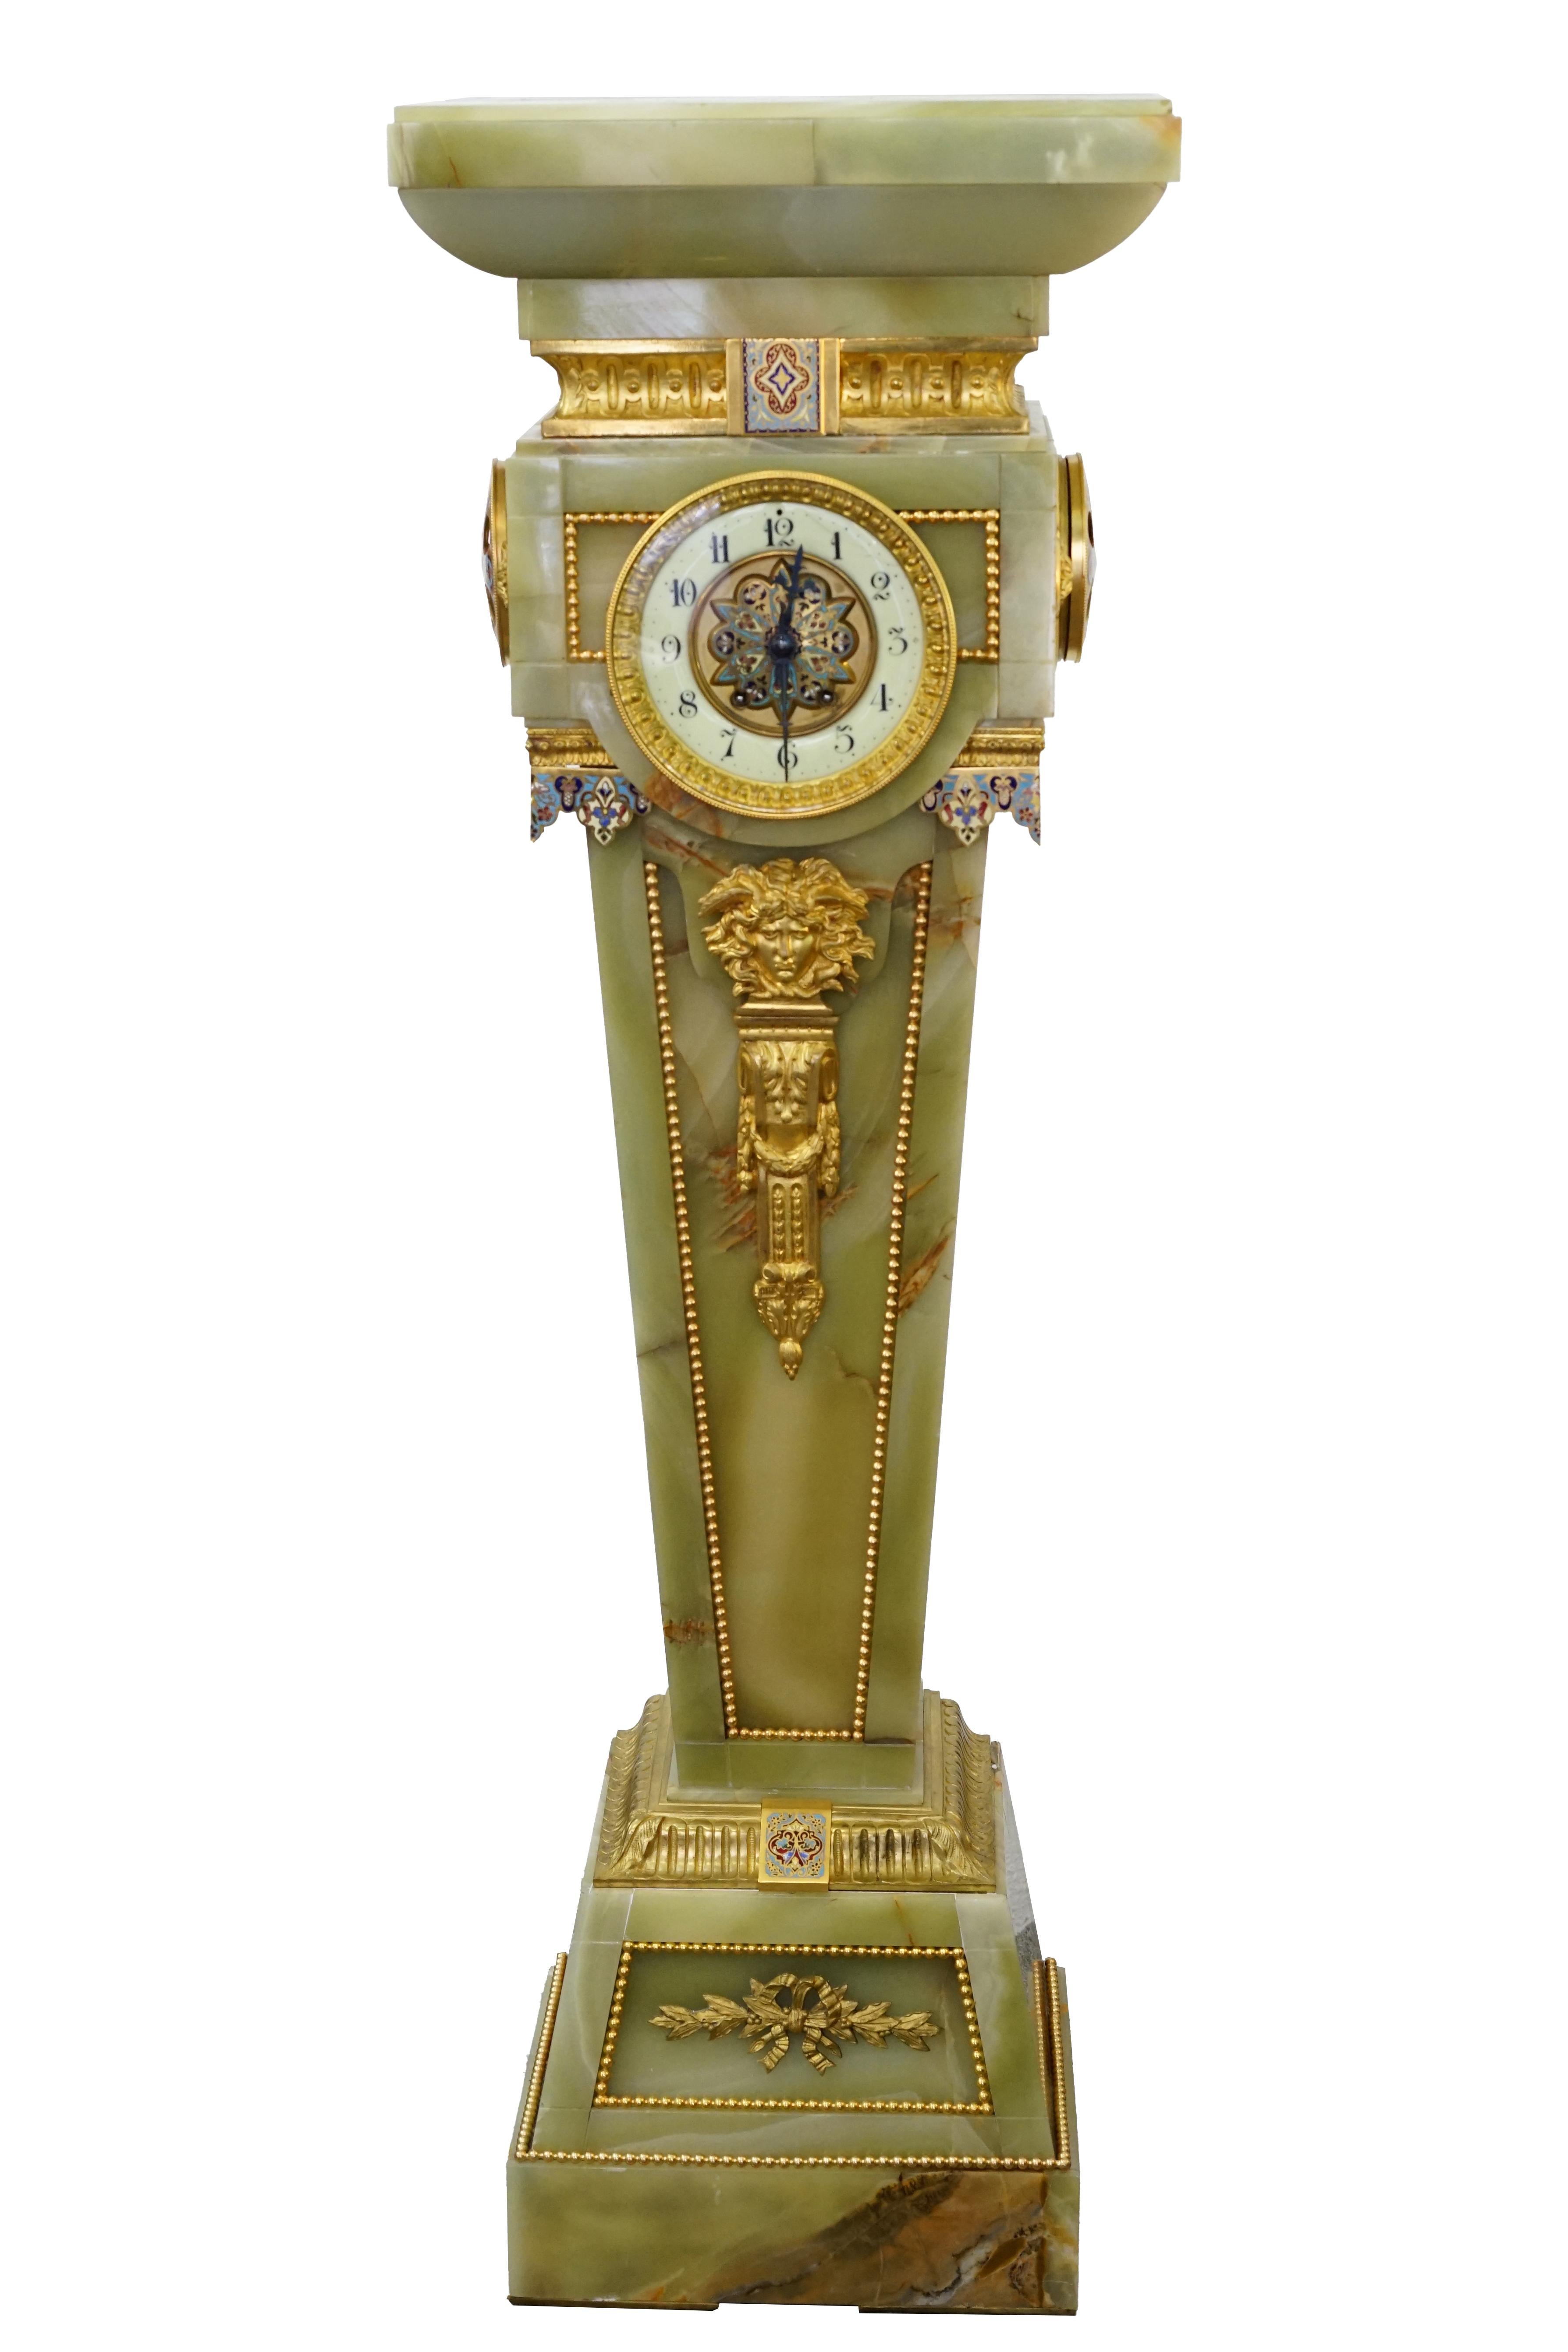 Napoleon III pedestal with clock
Onyx marble column and champleve enamel with golden bonce
The watch has very fine machinery and is stamped Vincenti y Cia 1855
The machinery works
Circa 1870 Origin France
some natural wear and minor repairs to the